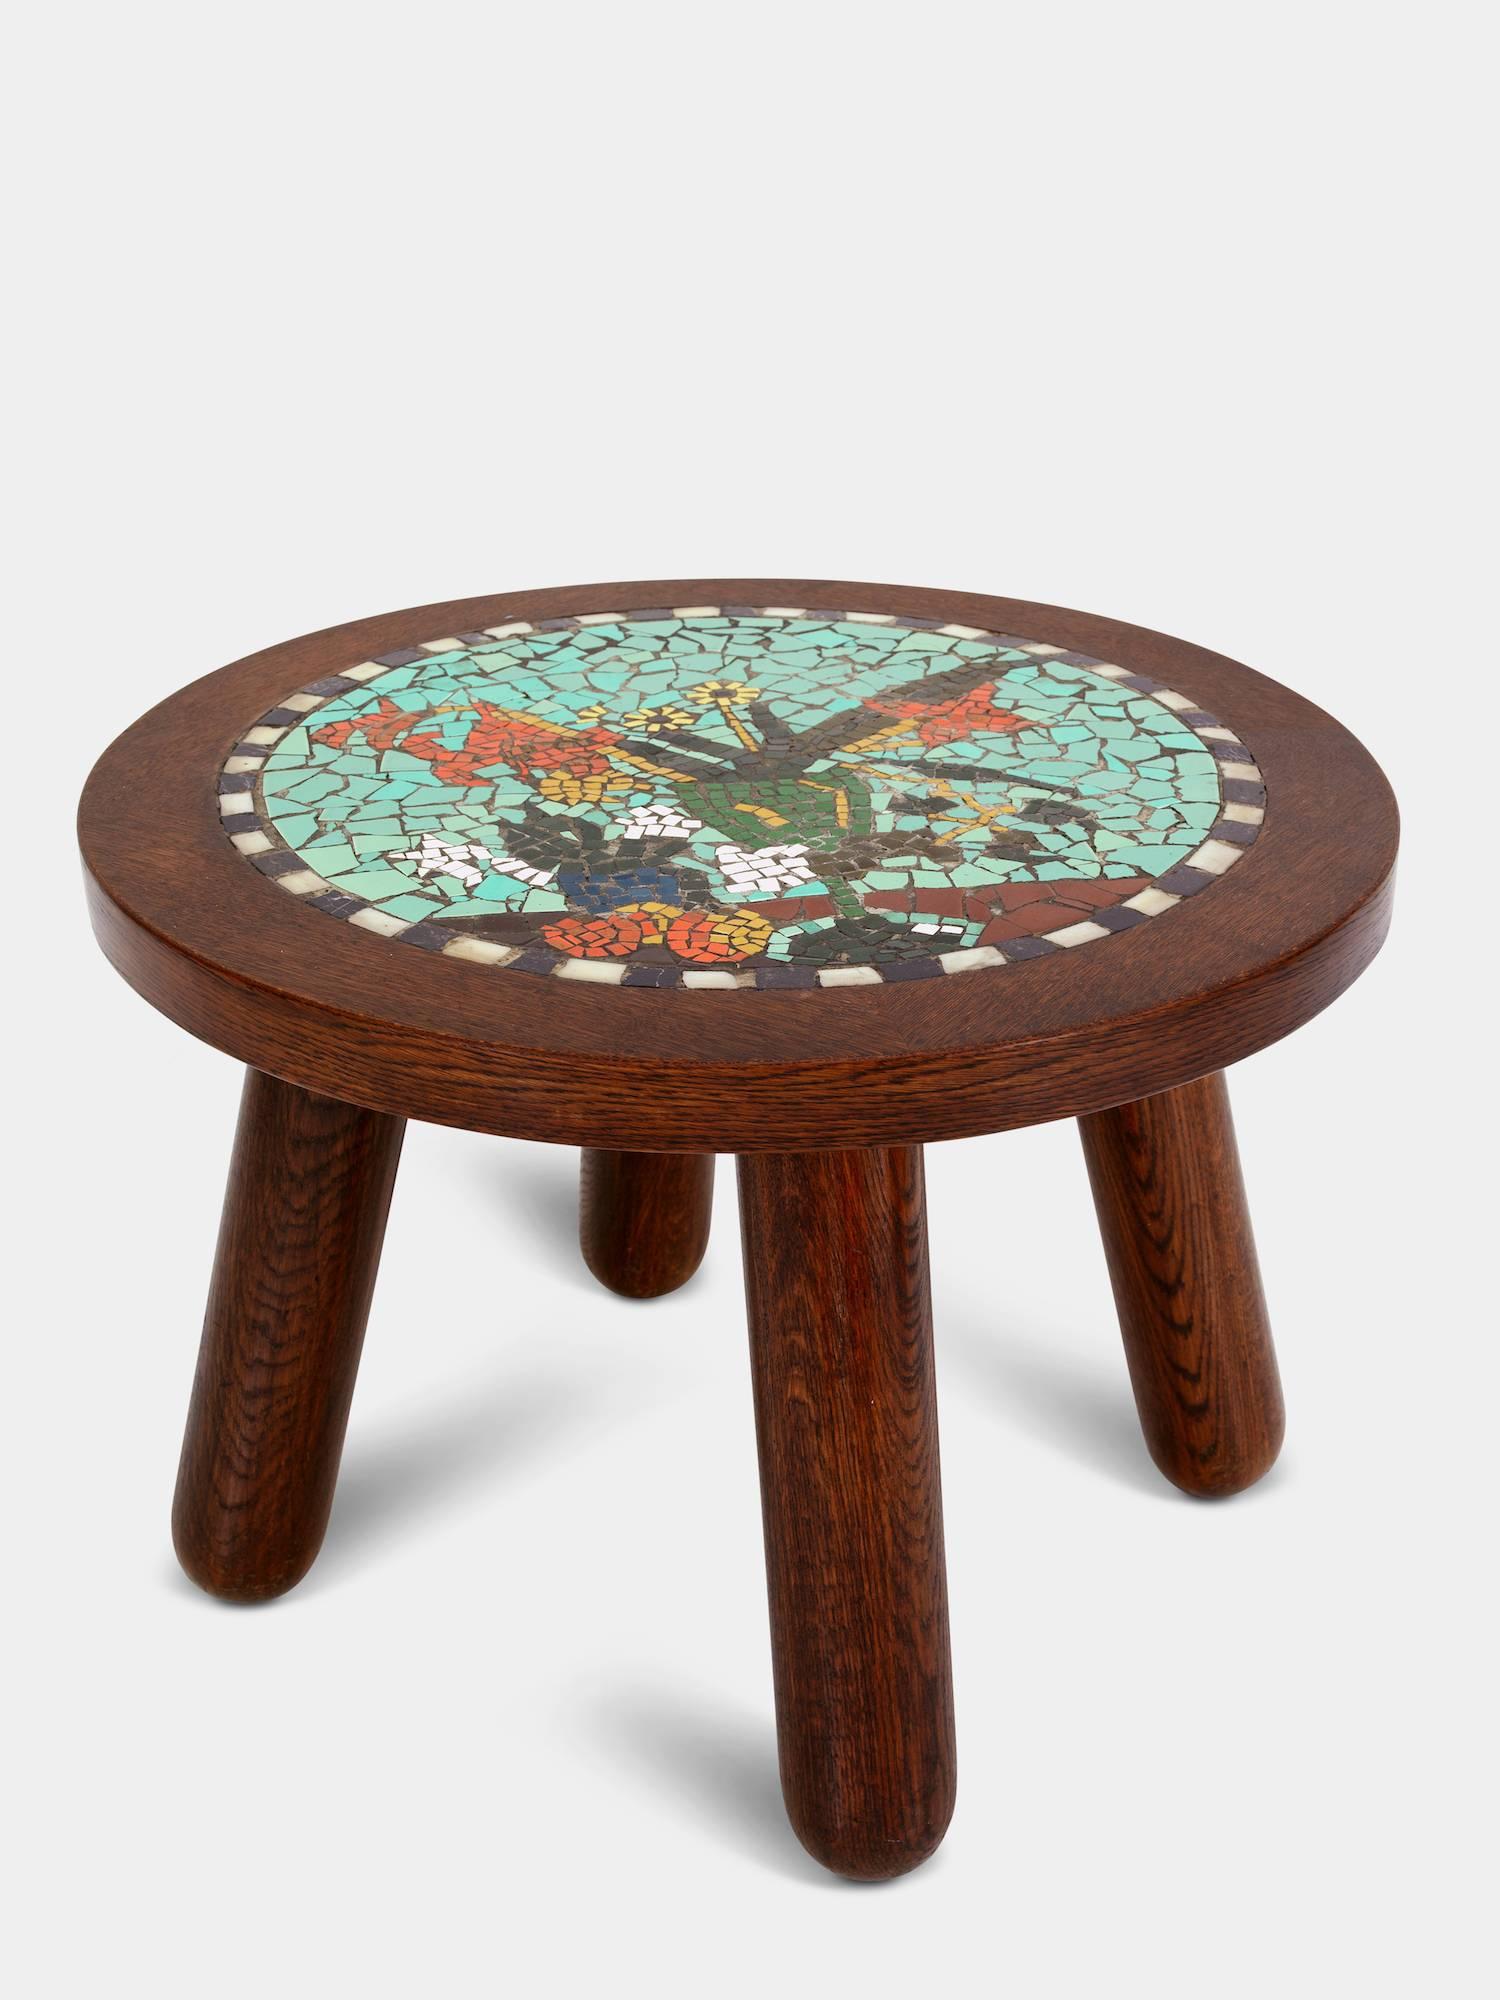 Circular coffee table of solid oak mounted on round club legs. Tabletop decorated with mosaik.
Designed and manufactured in the 1940s.